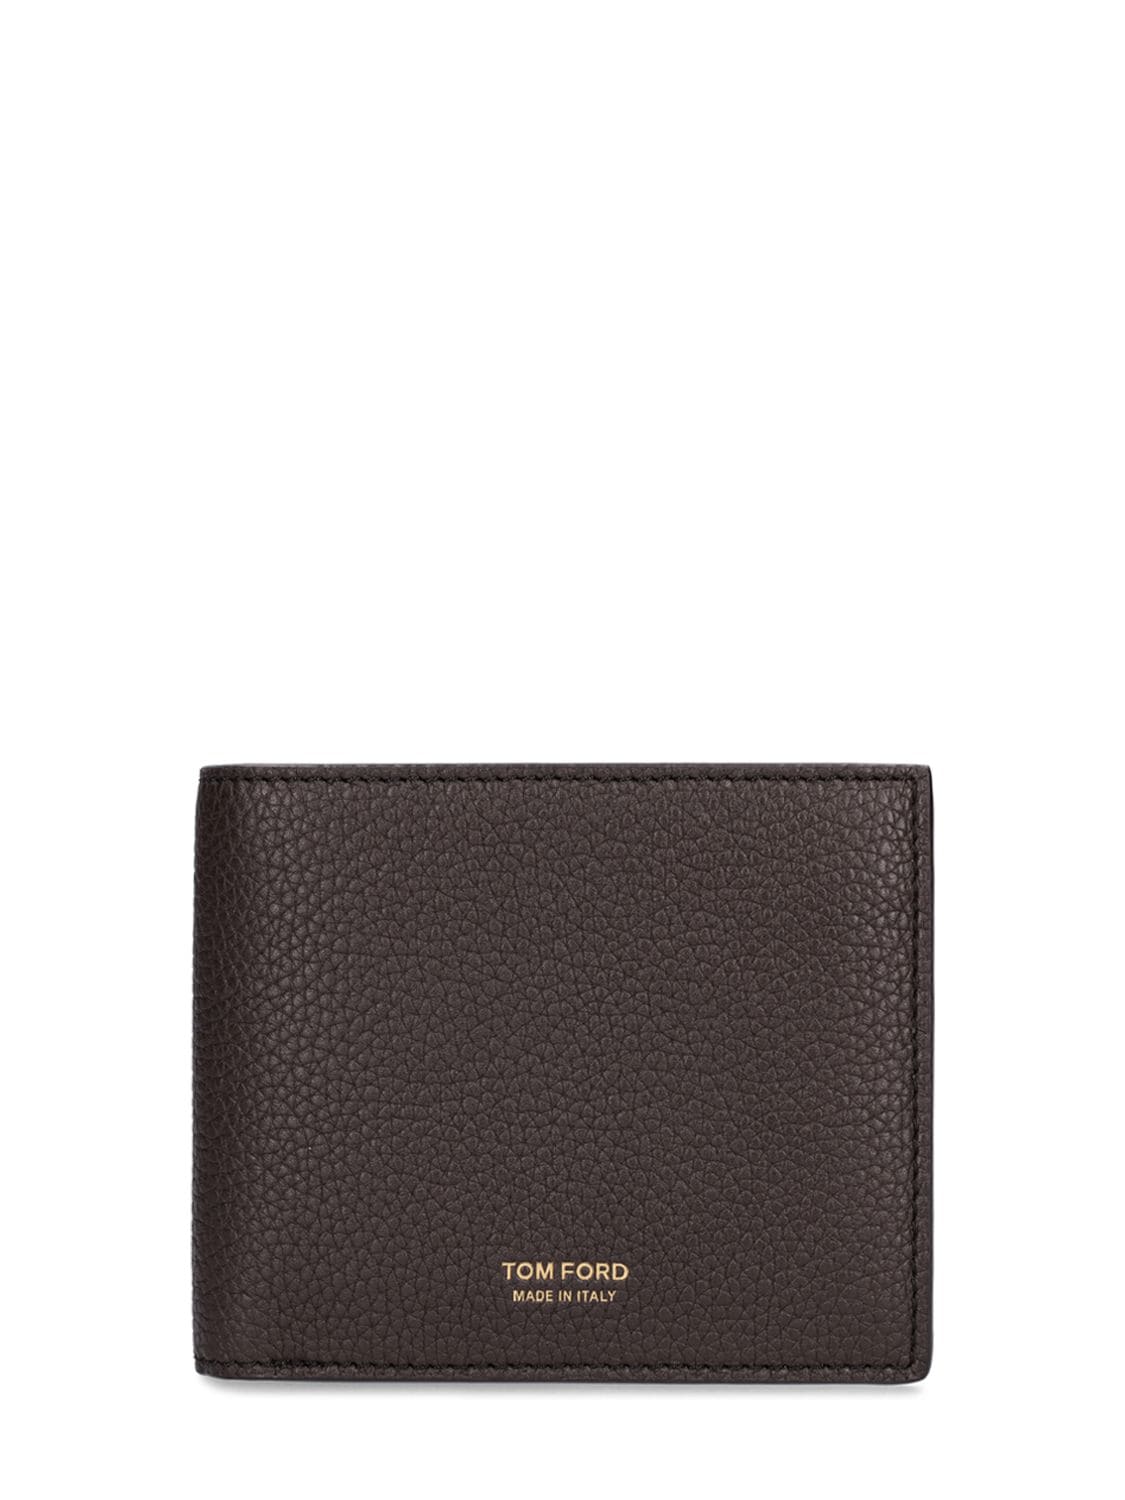 Tom Ford Soft Grain Leather Wallet W/logo In Chocolate